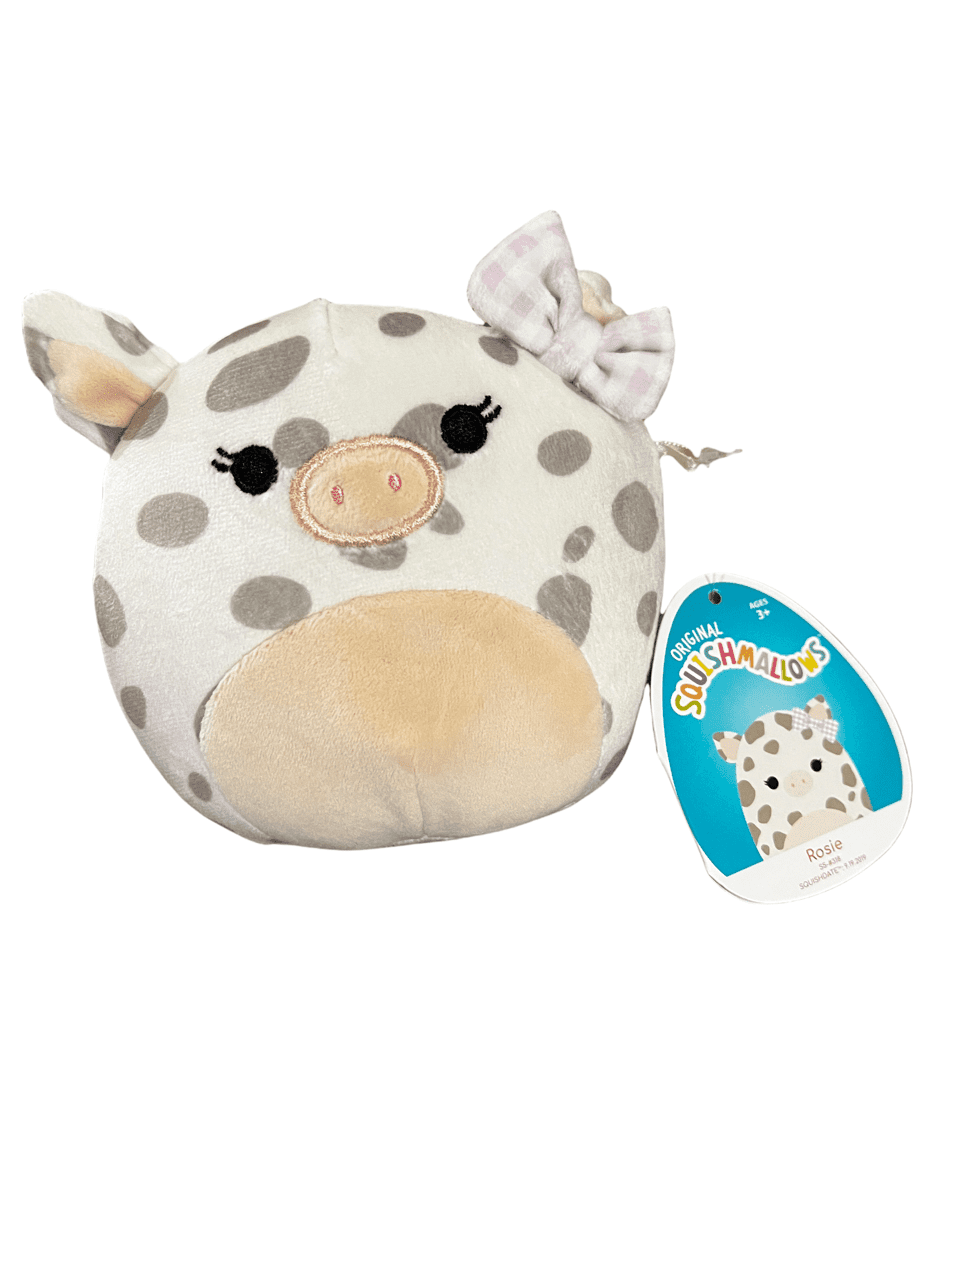 Squishmallow 5 Inch Rosie Bandana Spotted Pig Easter 2021 Exclusive Kellytoy 